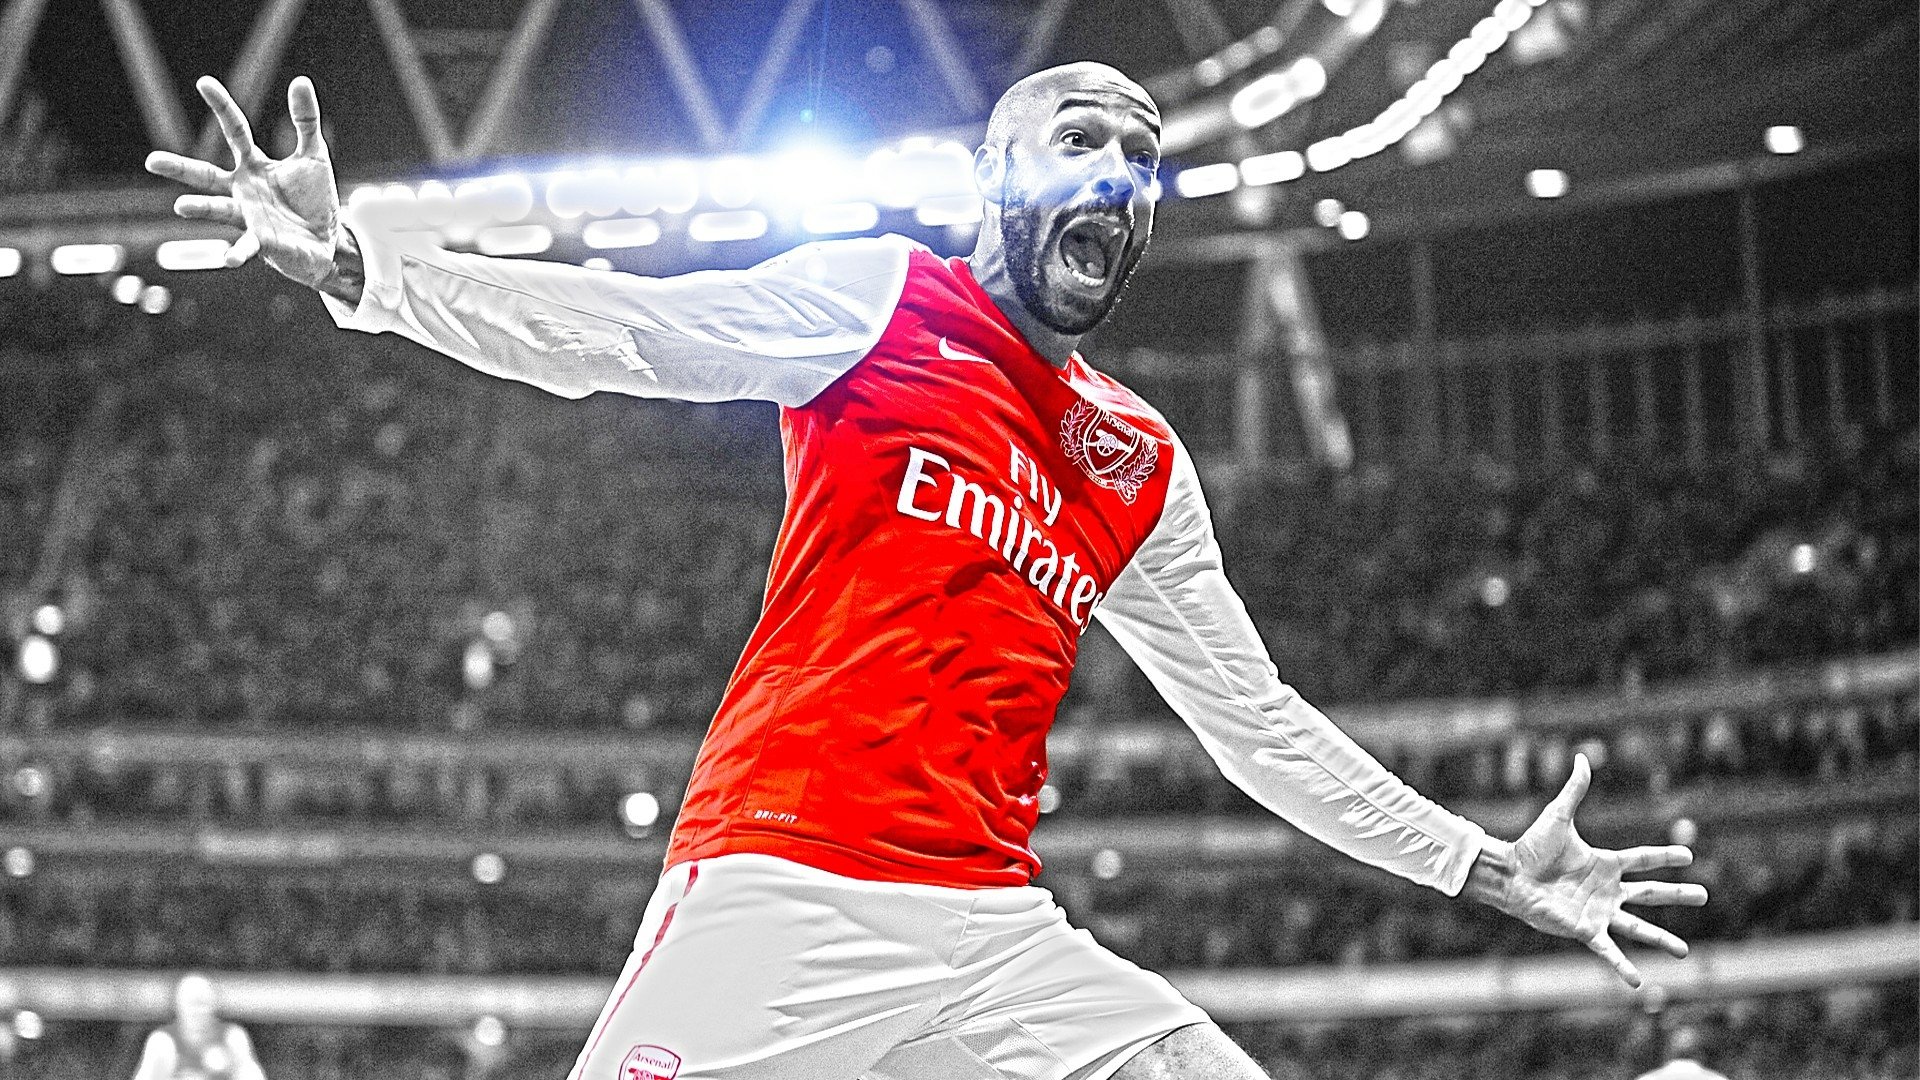 Thierry Henry photo 4 of 8 pics, wallpaper - photo #447973 - ThePlace2